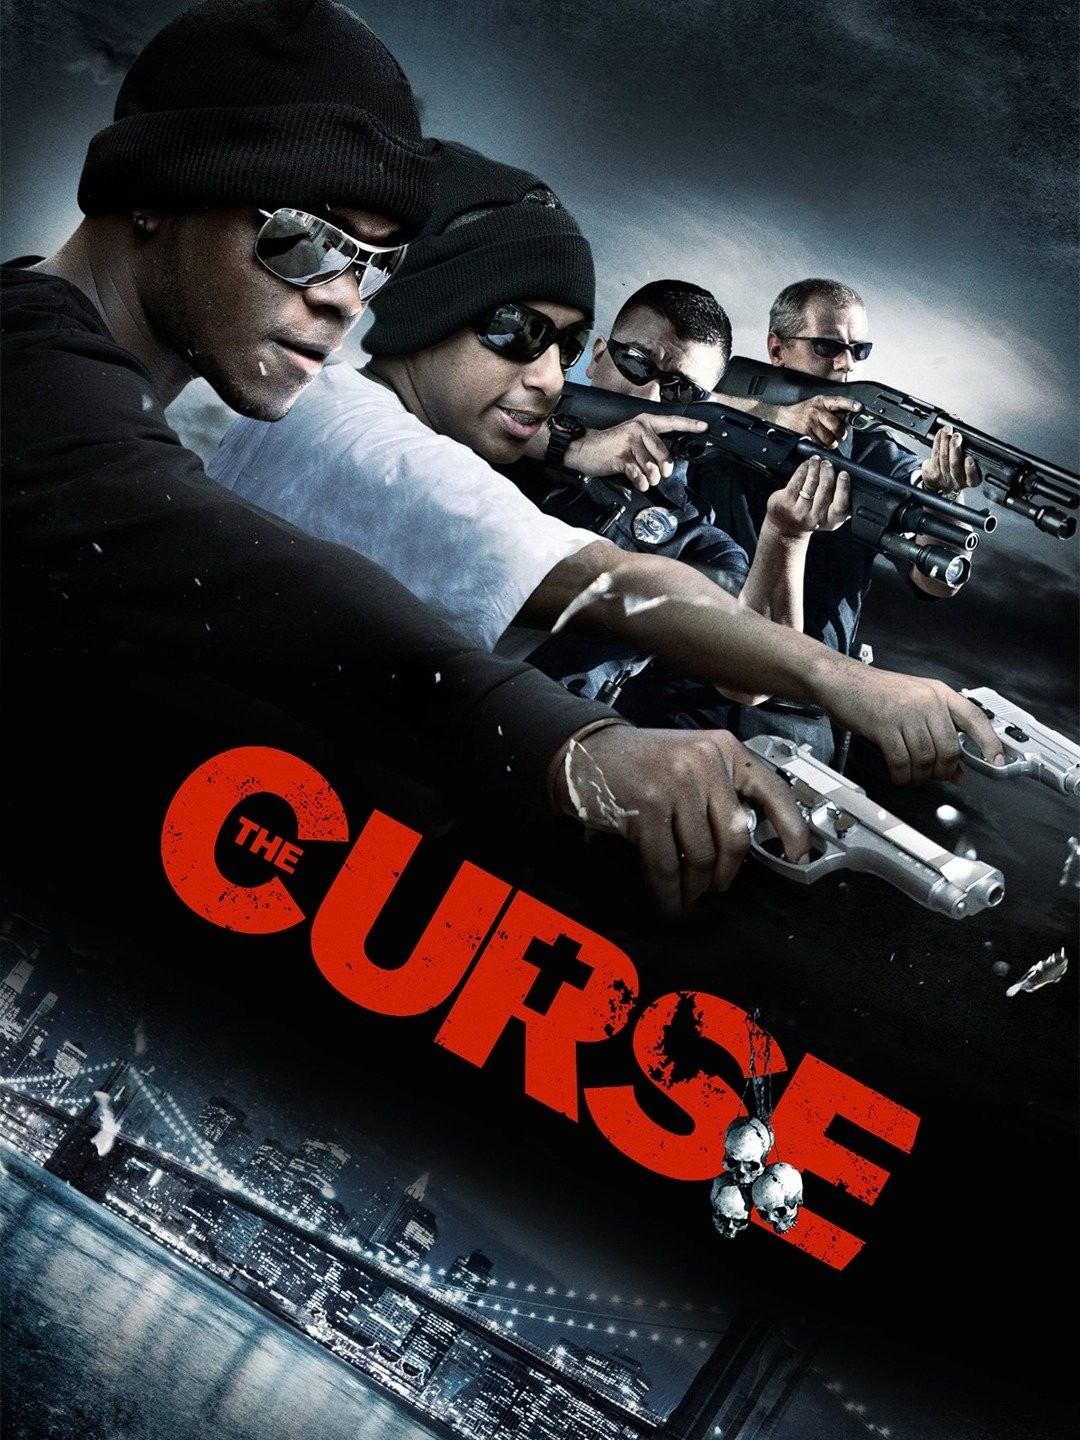 The Curse - Rotten Tomatoes